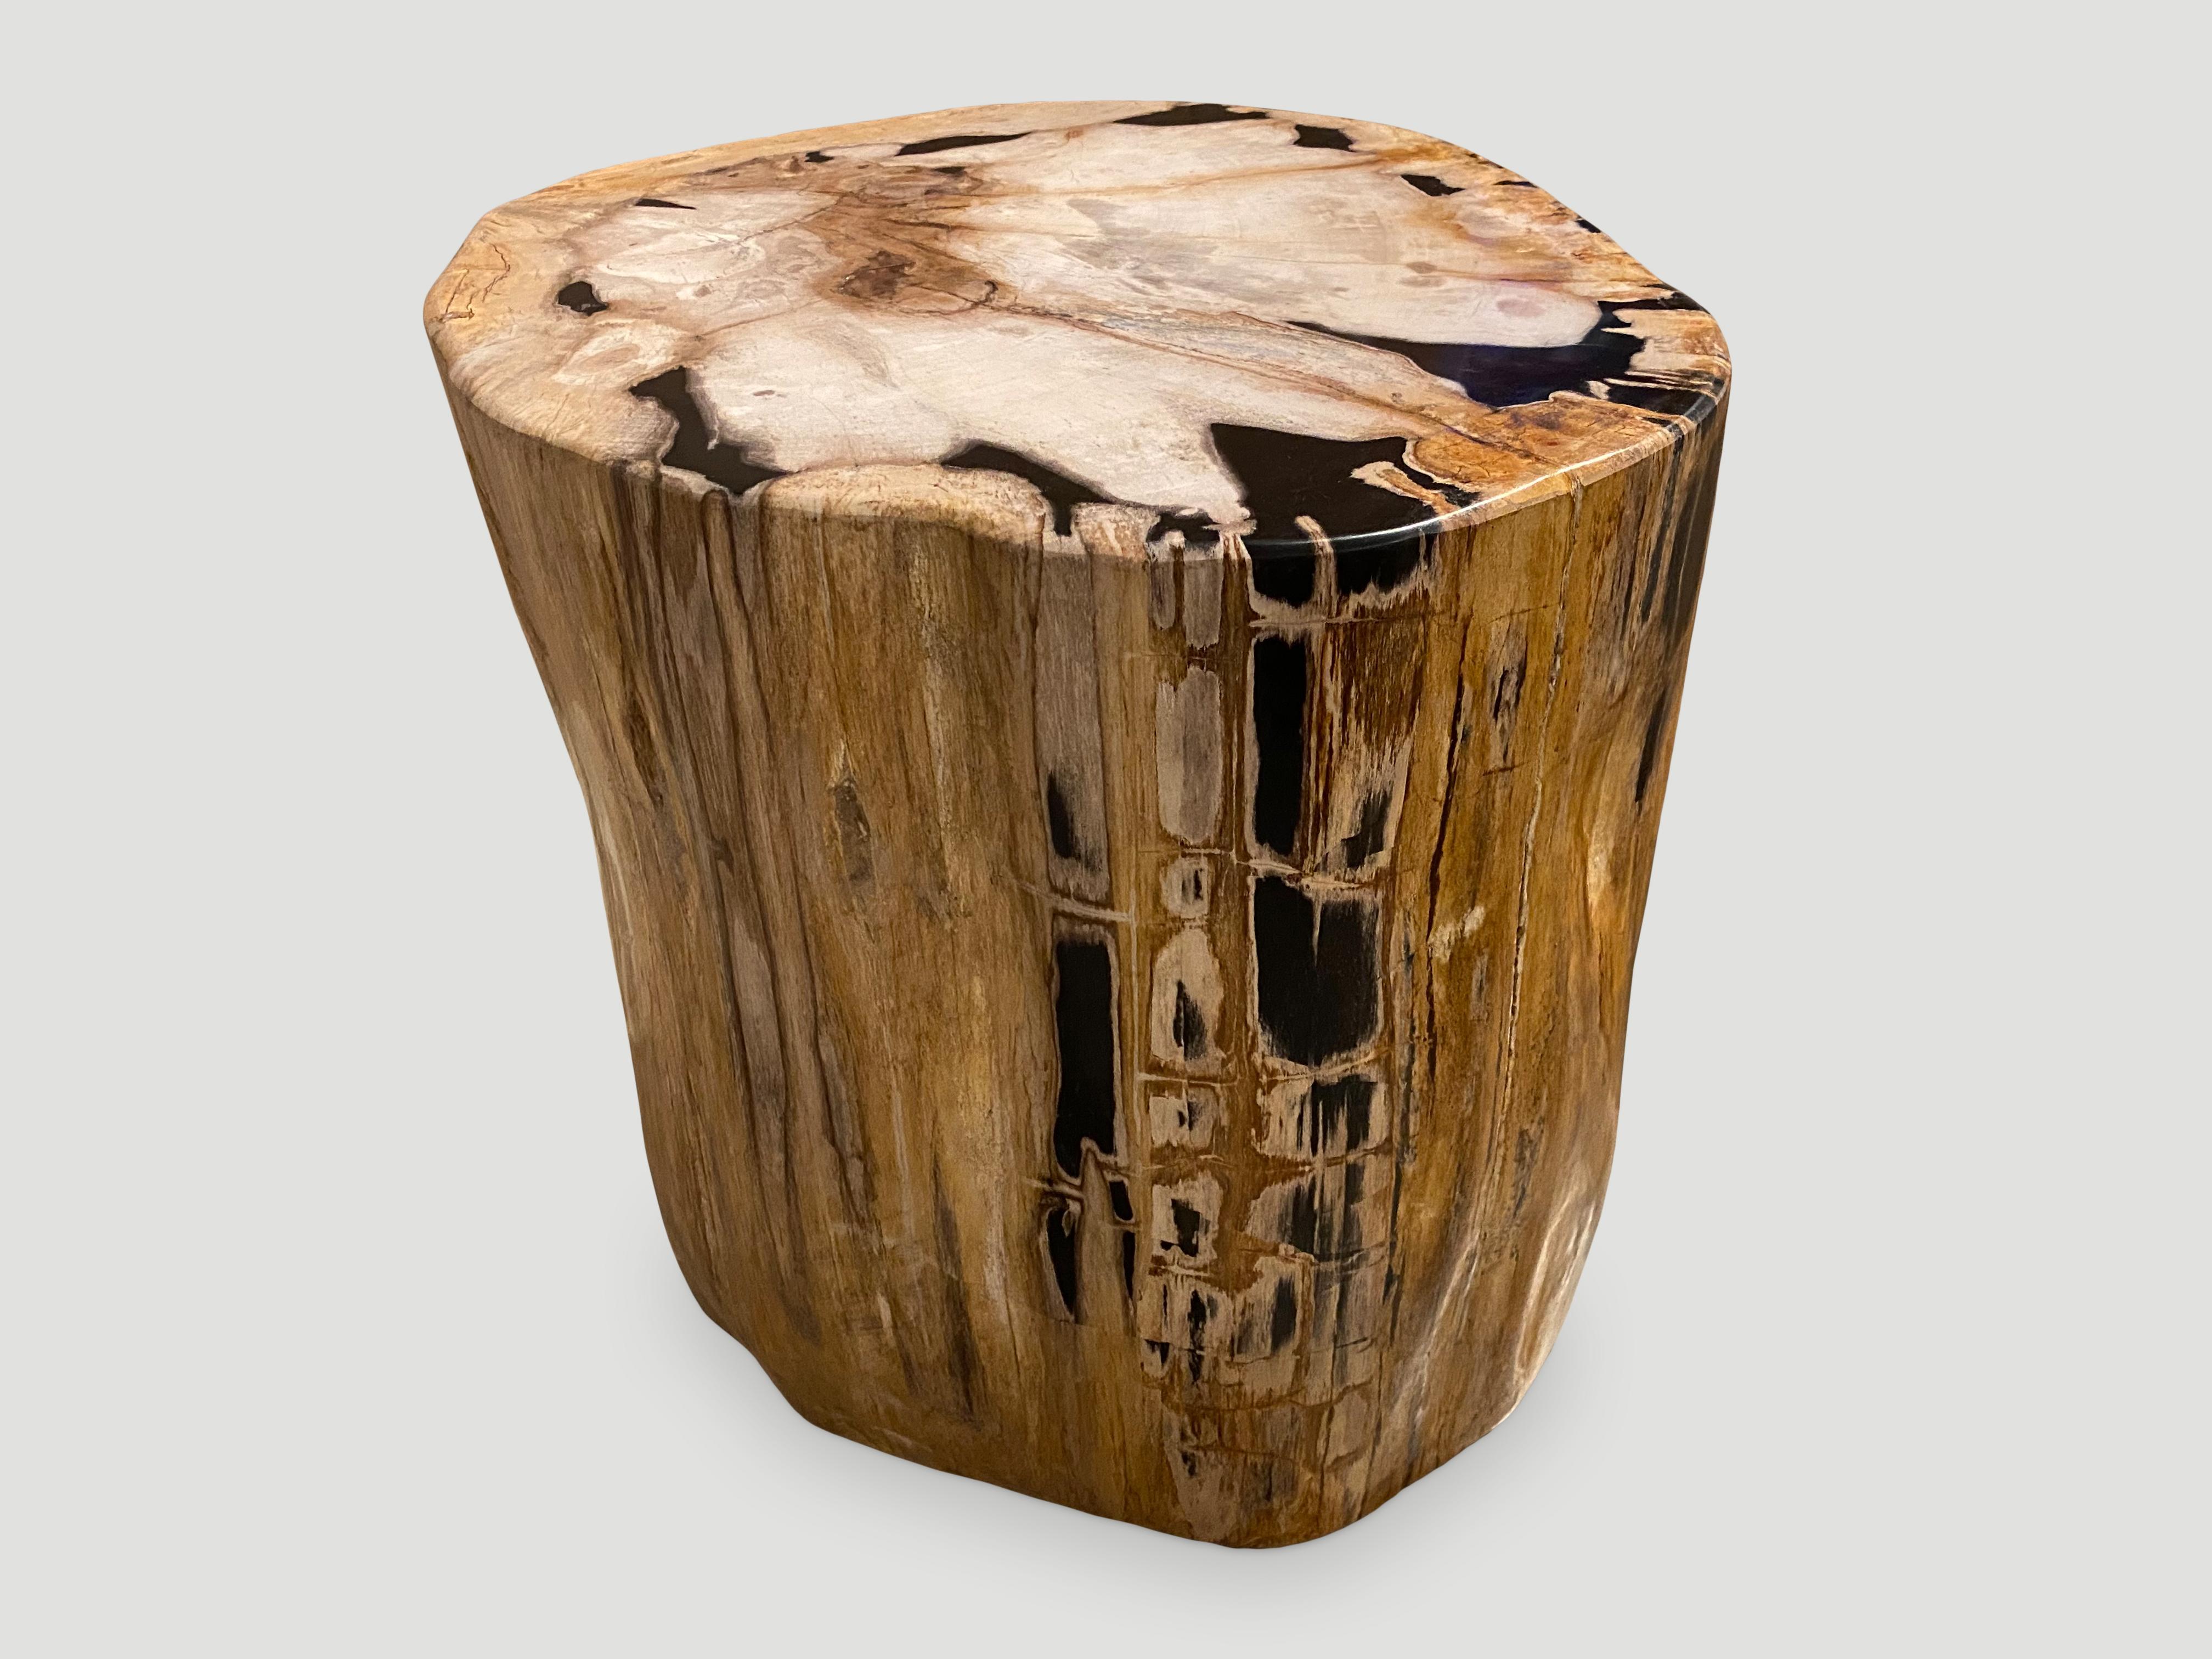 Beautiful natural markings on this impressive “tiger print” high quality petrified wood side table.

It’s fascinating how Mother Nature produces these exquisite 40 million year old petrified teak logs with such contrasting colors and natural